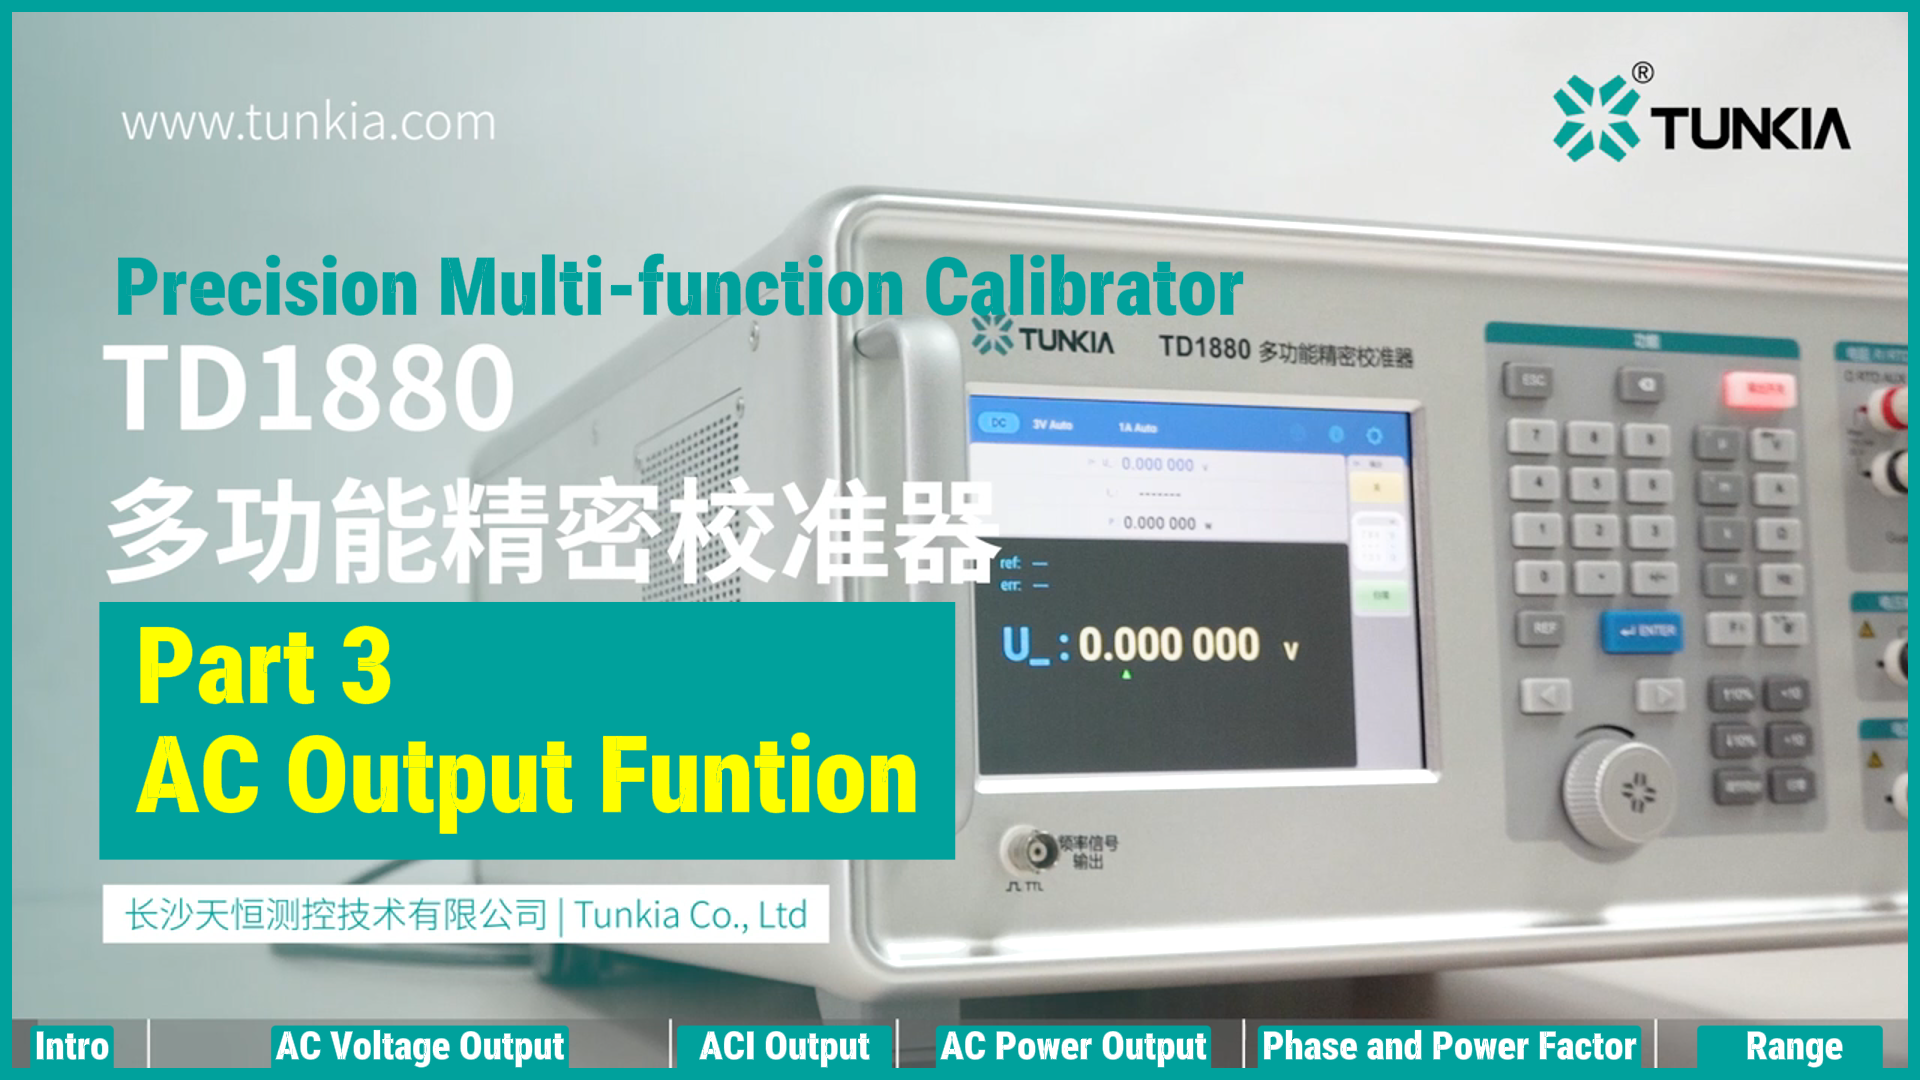 How to use the AC output function of the TD1880 multifunction calibrator?